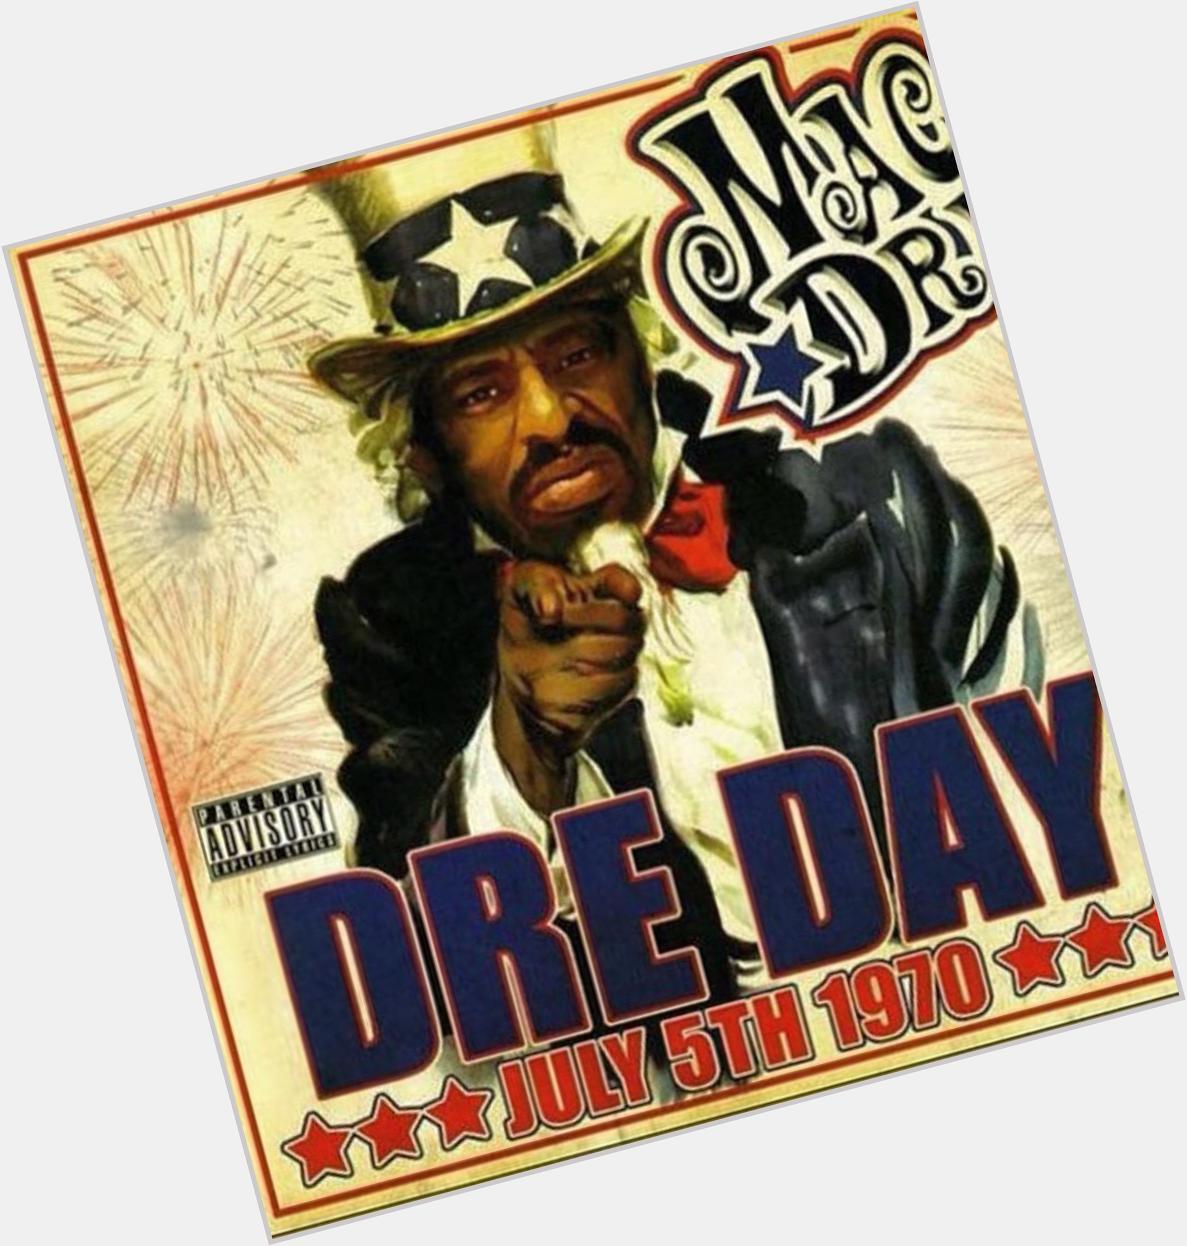 Happy birthday and RIP to my favorite rapper Mac Dre.   